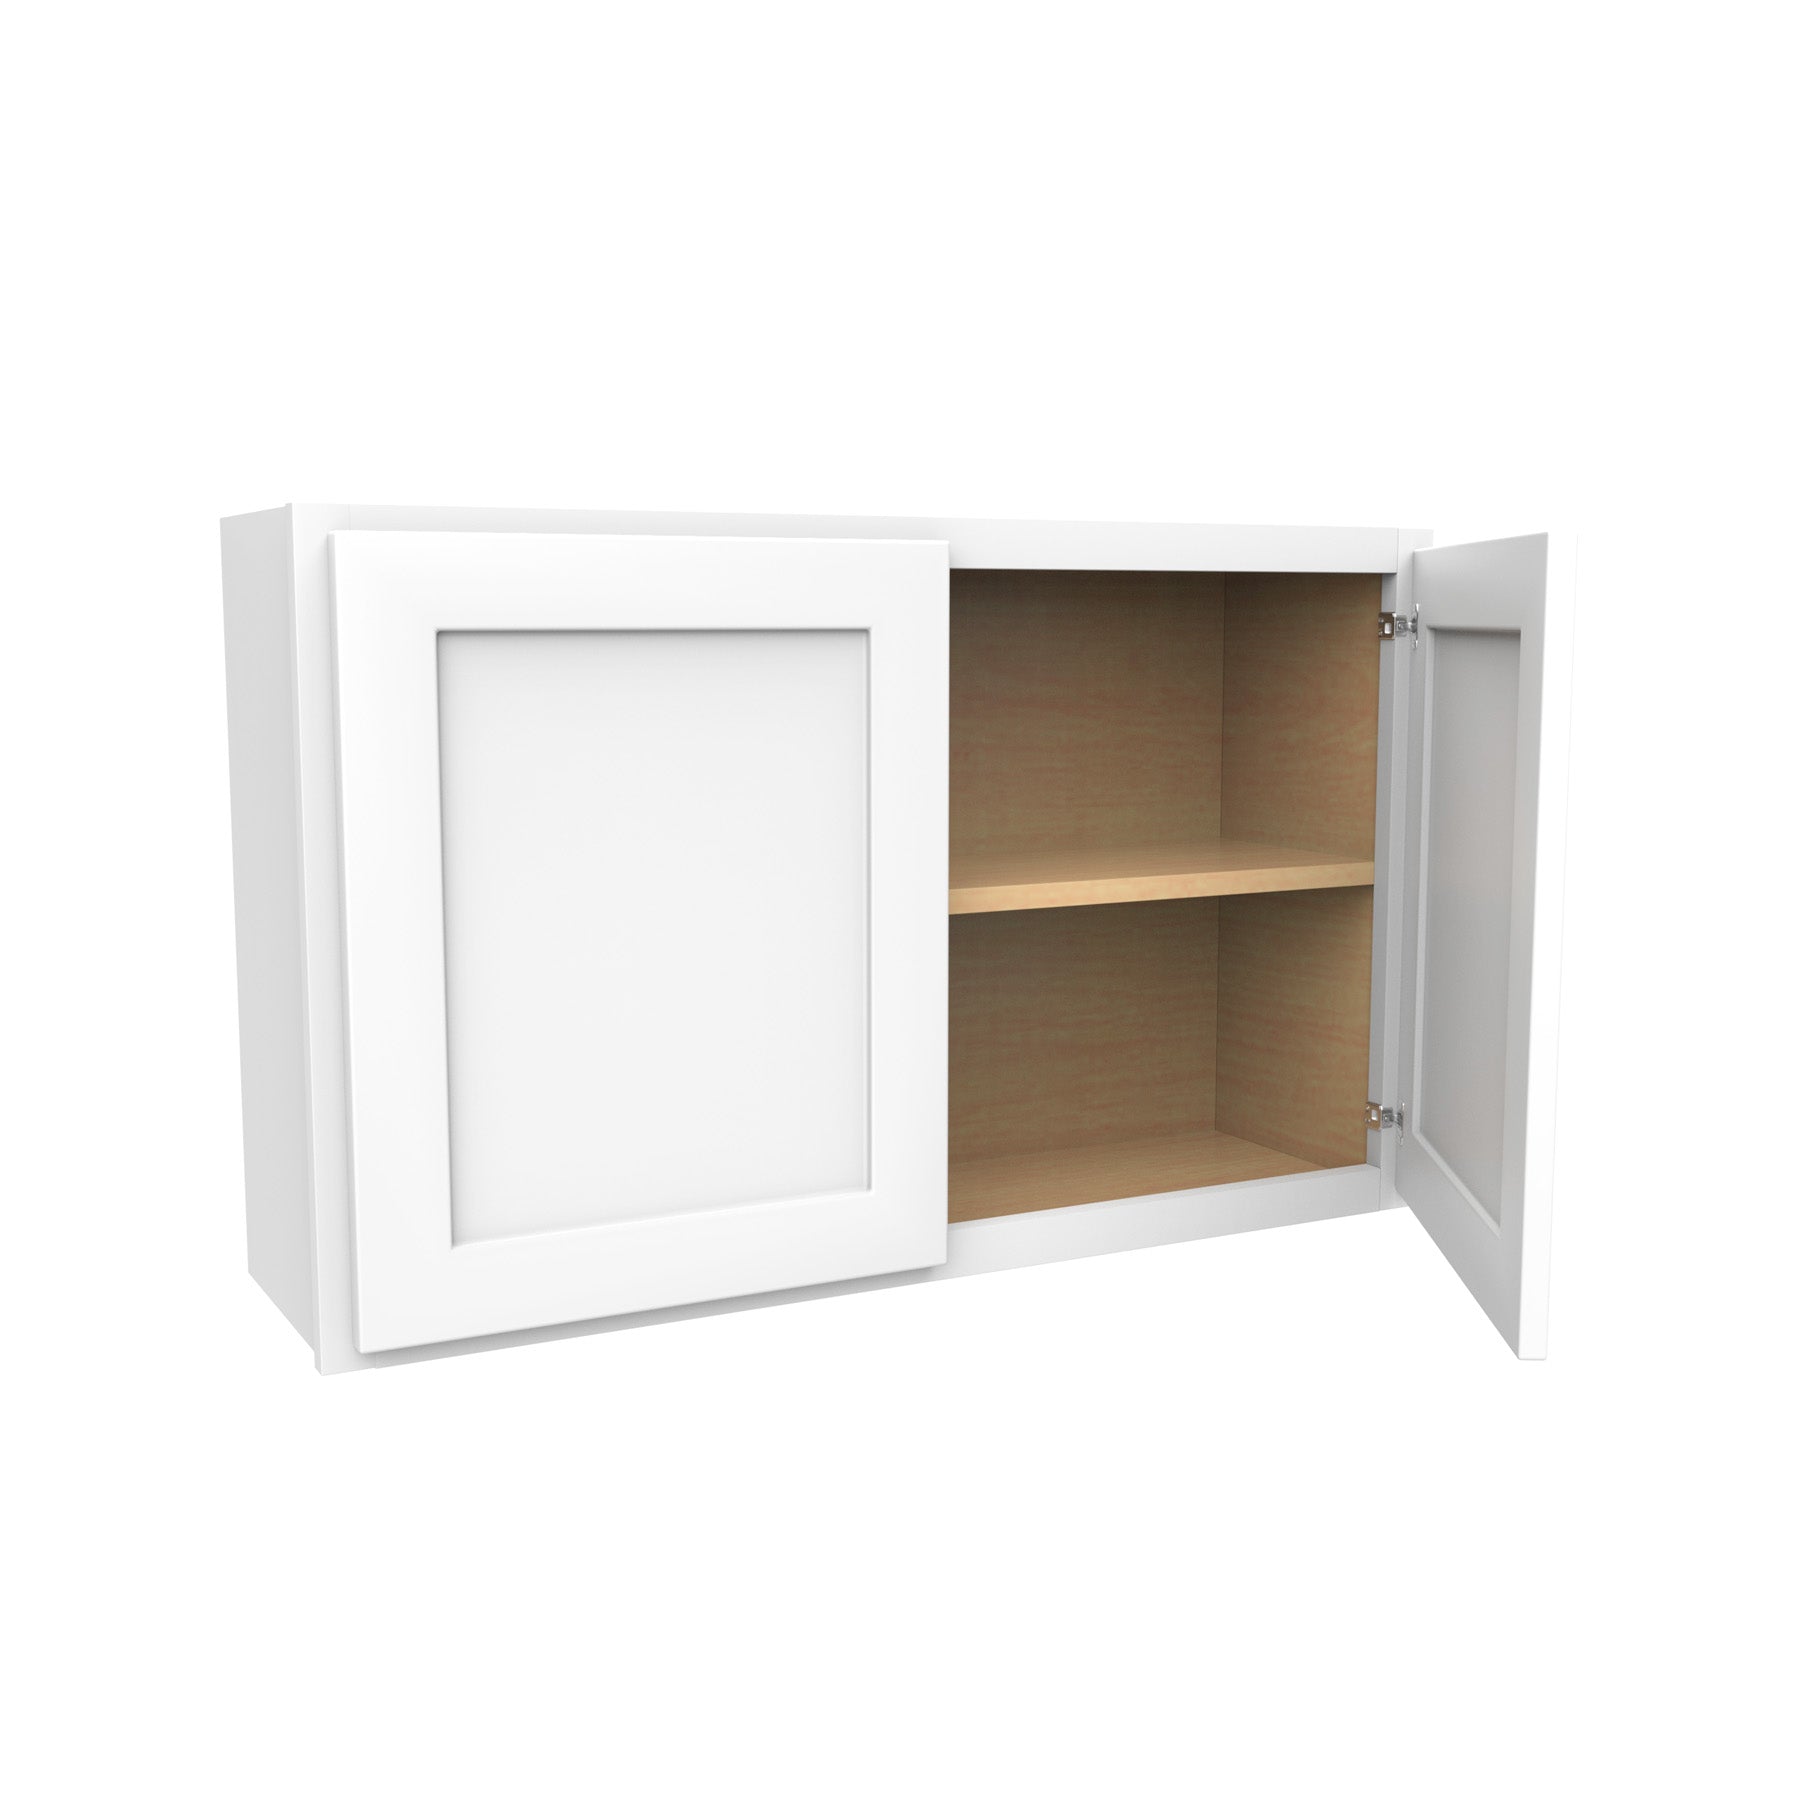 Luxor White - Double Door Wall Cabinet | 39"W x 24"H x 12"D